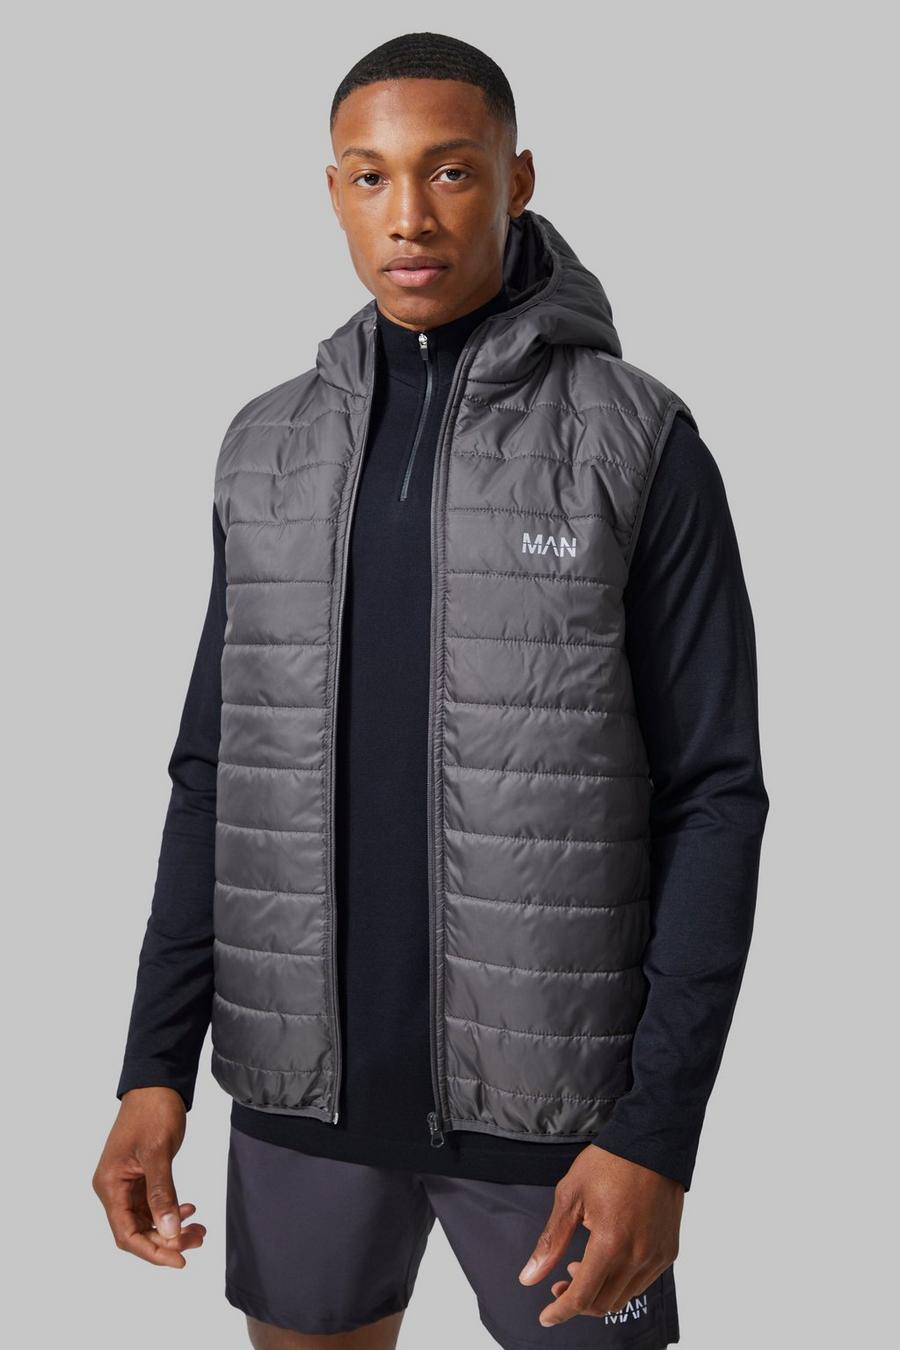 Charcoal gris Man Active Body Warmer